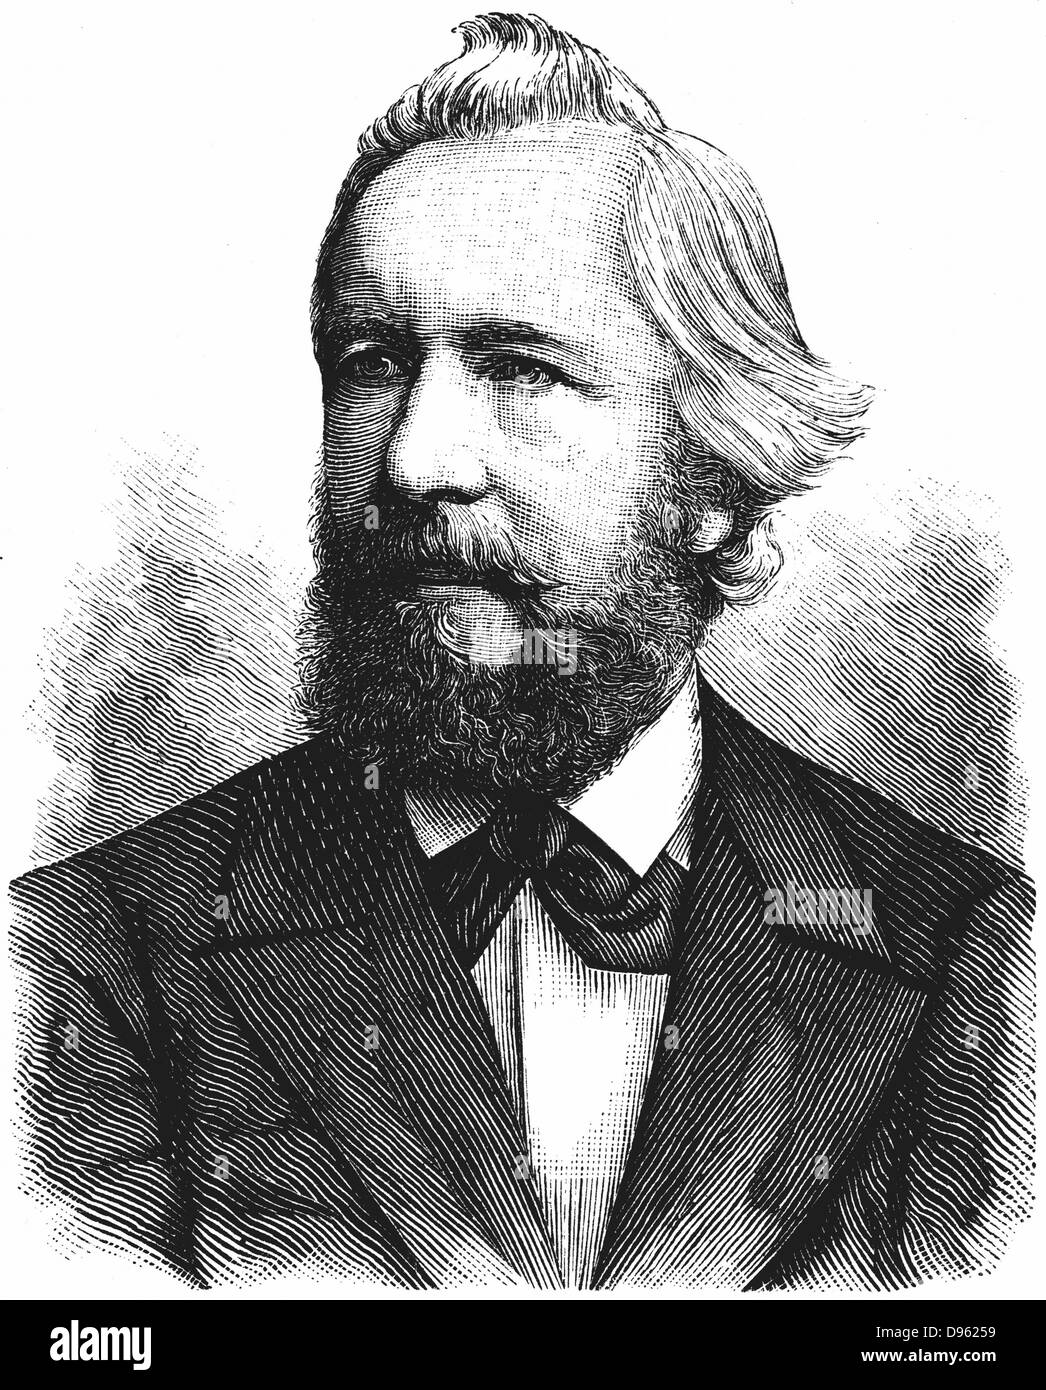 Ernst Haeckel (1834-1919) German zoologist and evolutionist. Recapitulation theory 'Ontology recapitulates phylogeny'. Wood engraving. Stock Photo